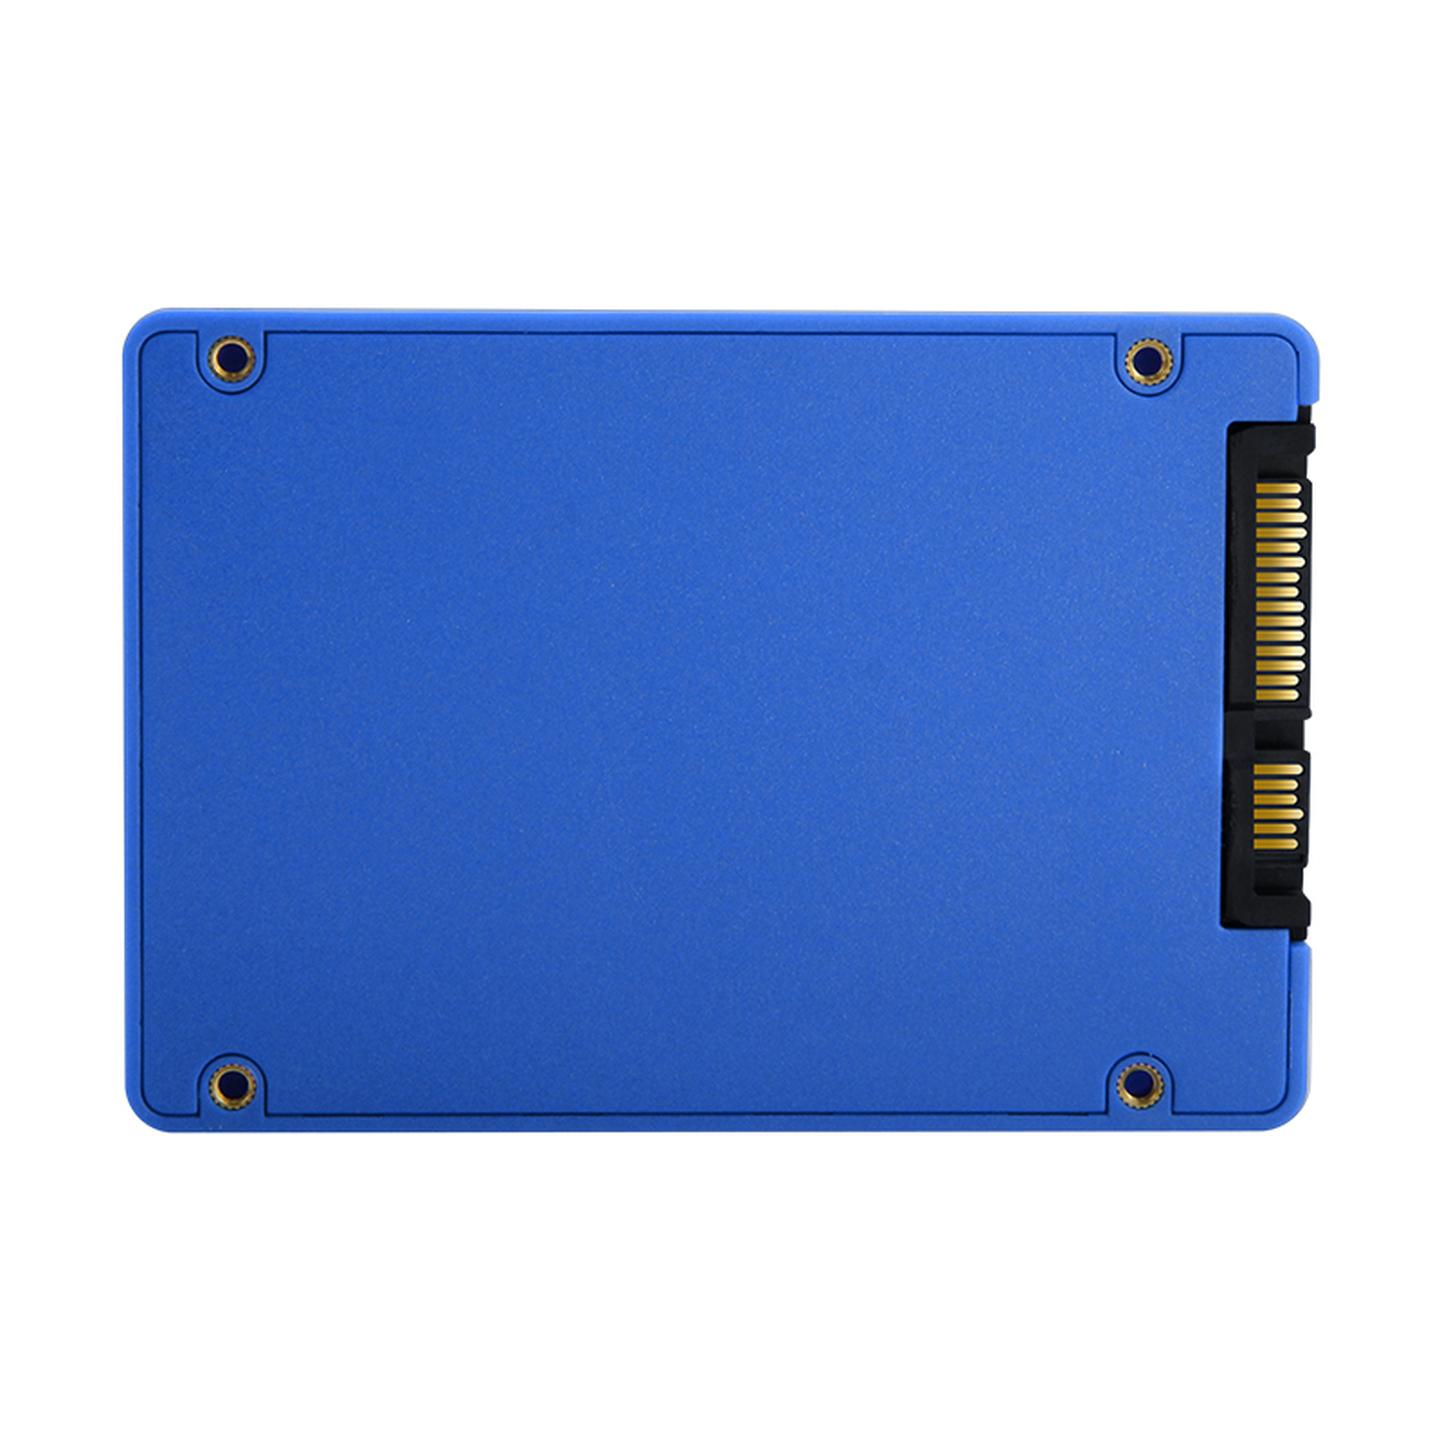 512GB 2.5in SATA SSD Reads 540MB/s Writes 490MB/s